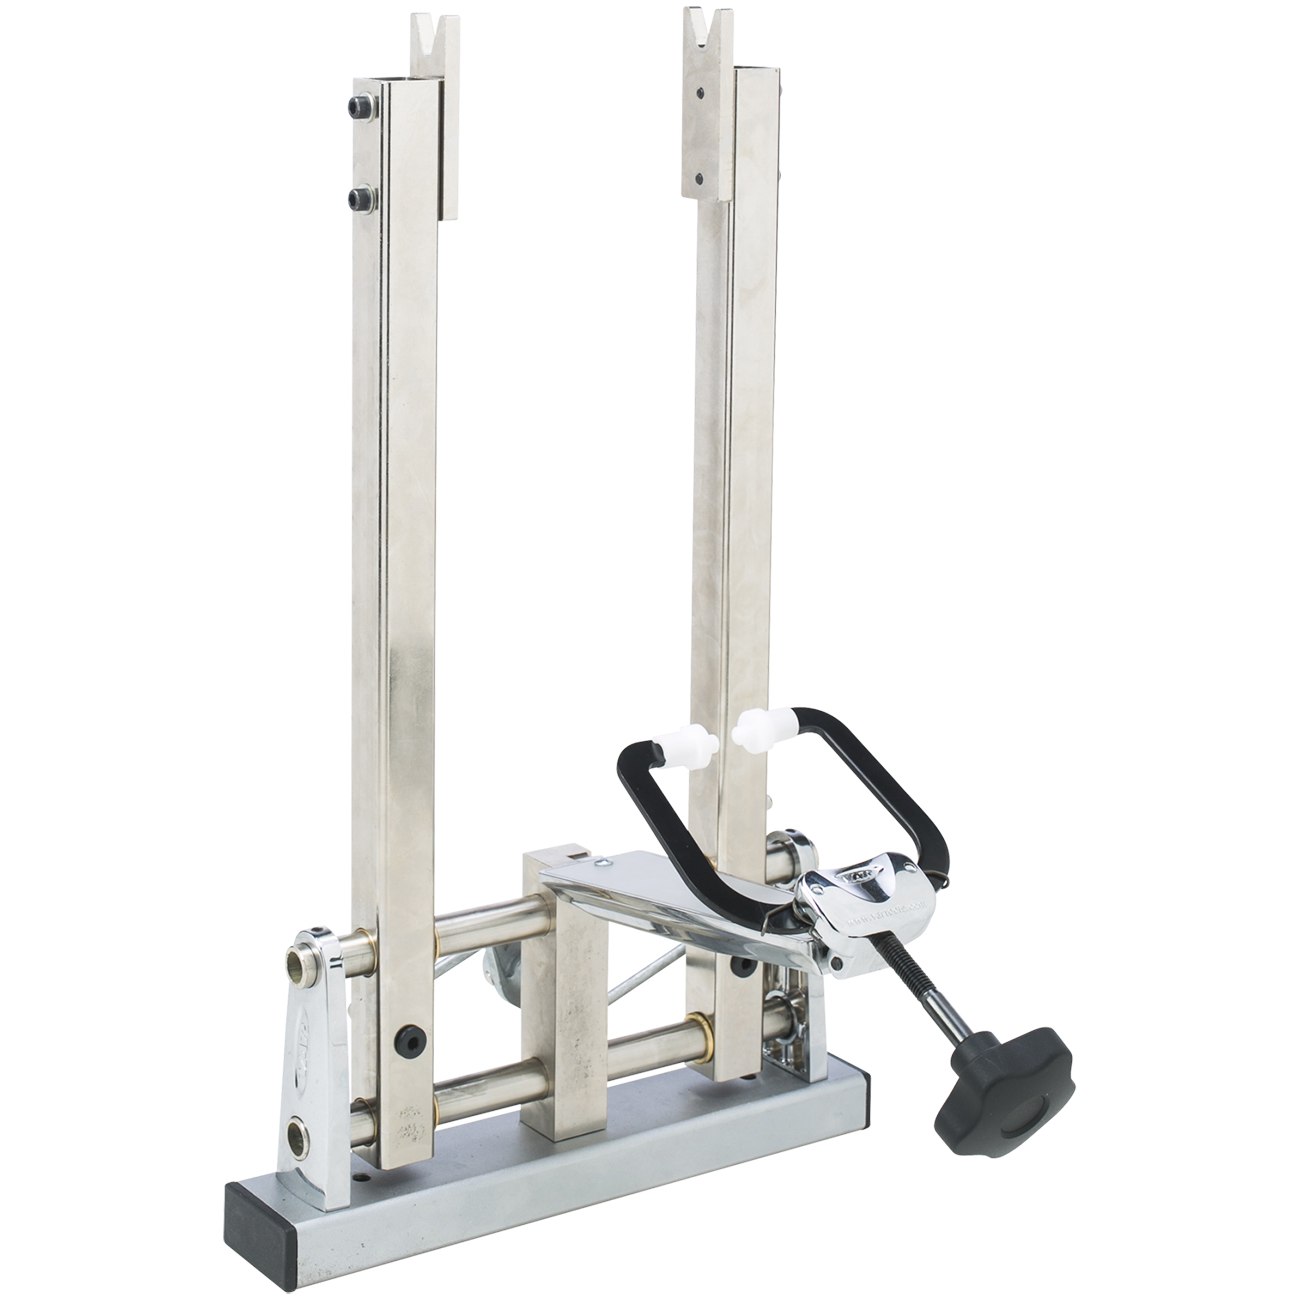 Picture of VAR Wheel Truing Stand - CR-07600 - silver